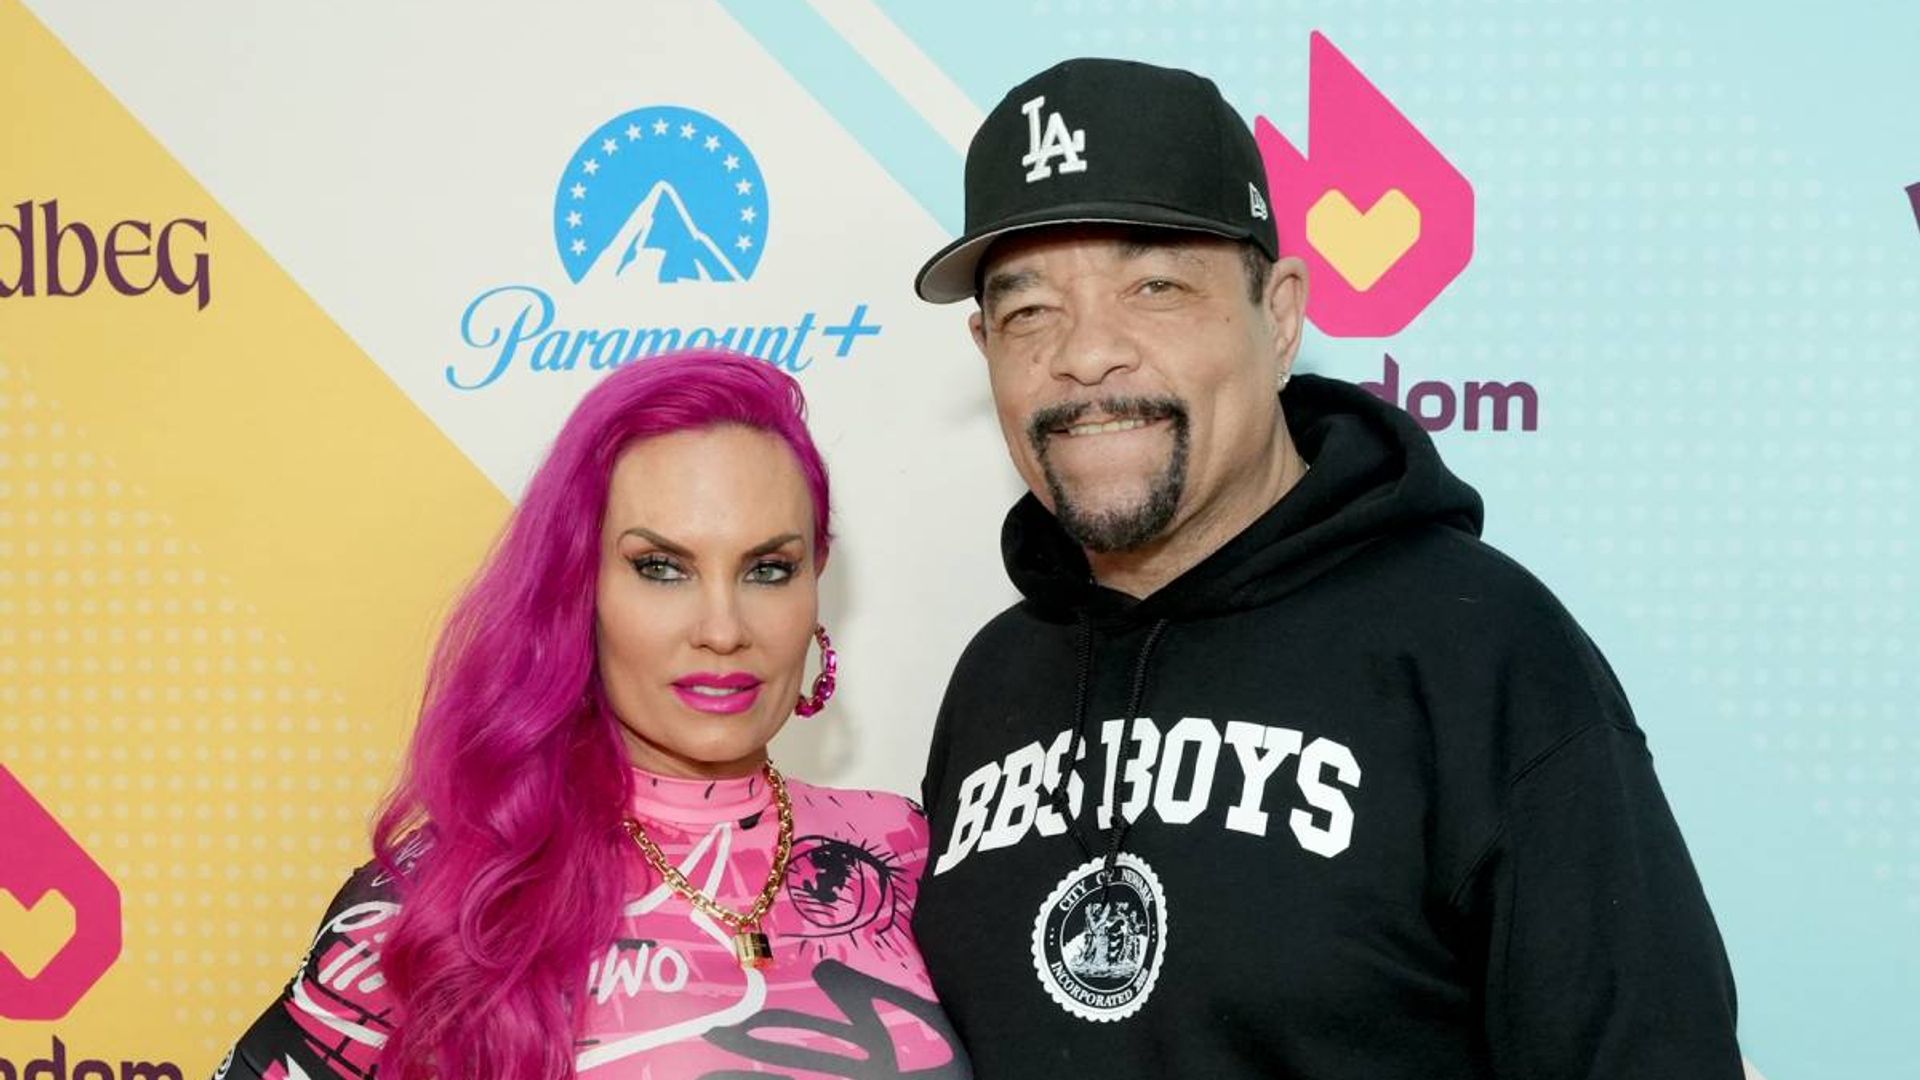 Law & Order: SVU's Ice-T breaks silence following criticism of his